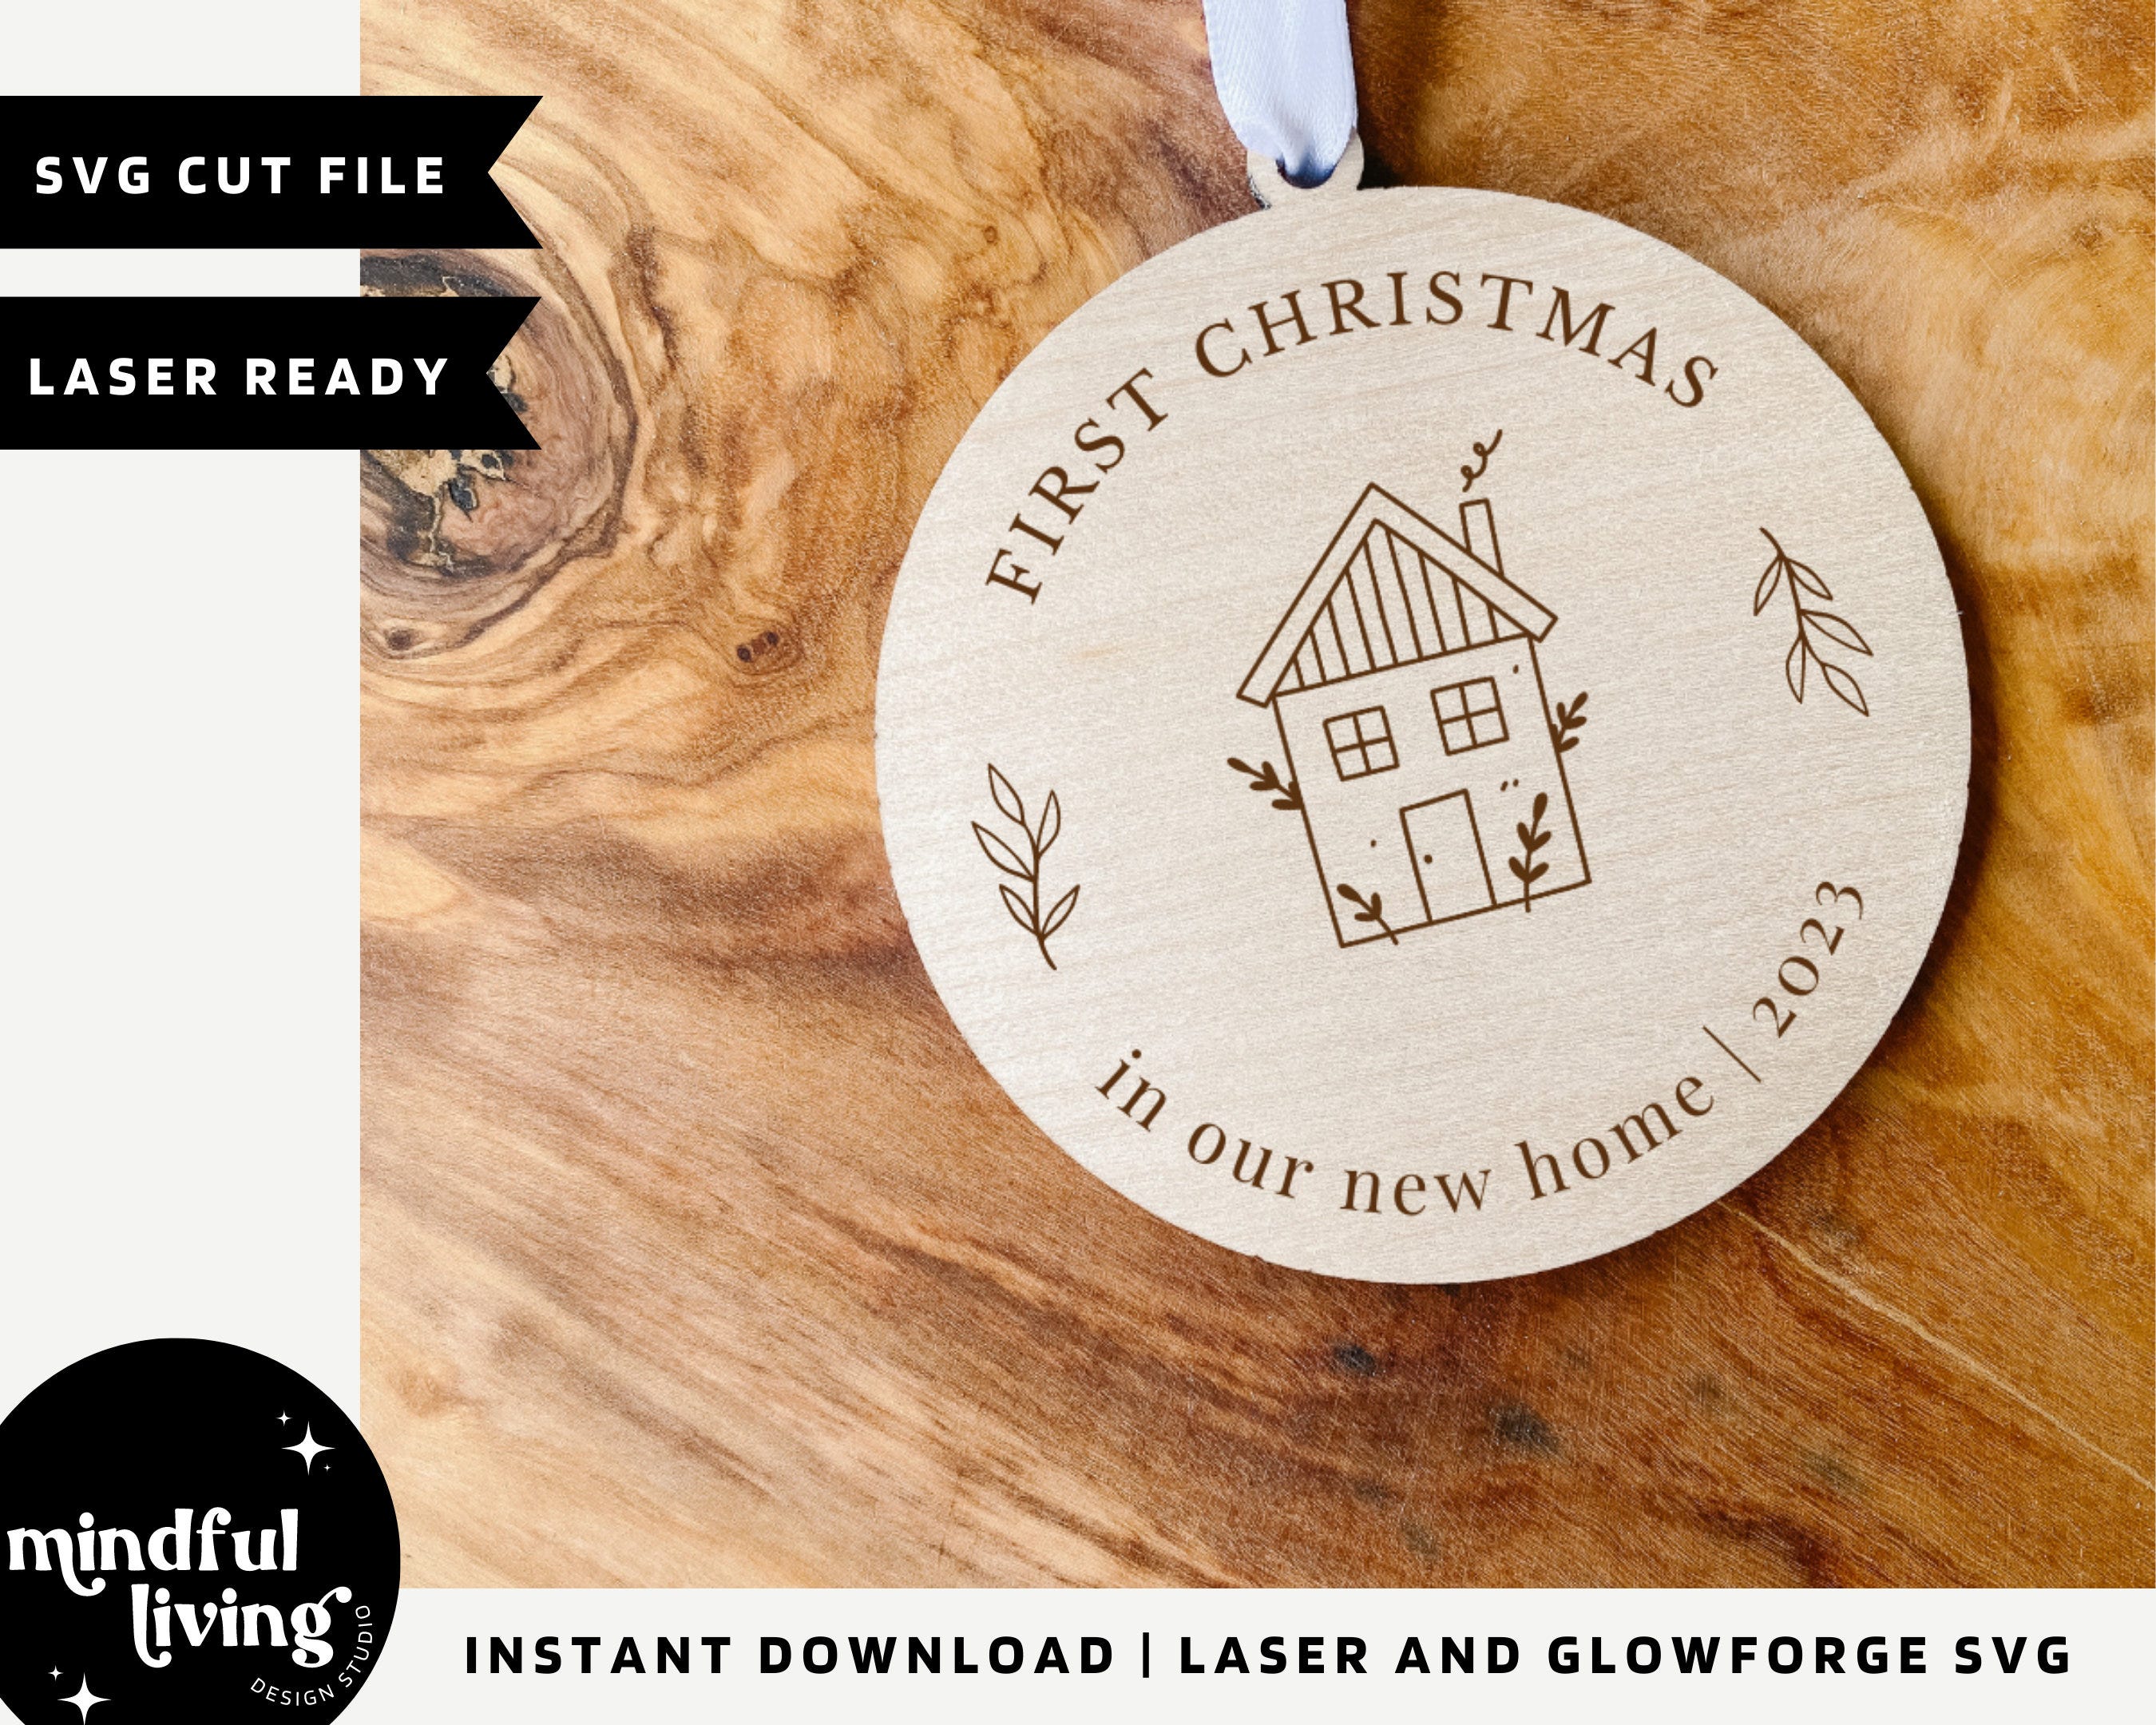 First Christmas in Our New Home SVG, Christmas Ornament Cut File, Ornament SVG, Ornament Cut File, 2023 Ornament Laser File, 2023 Ornament